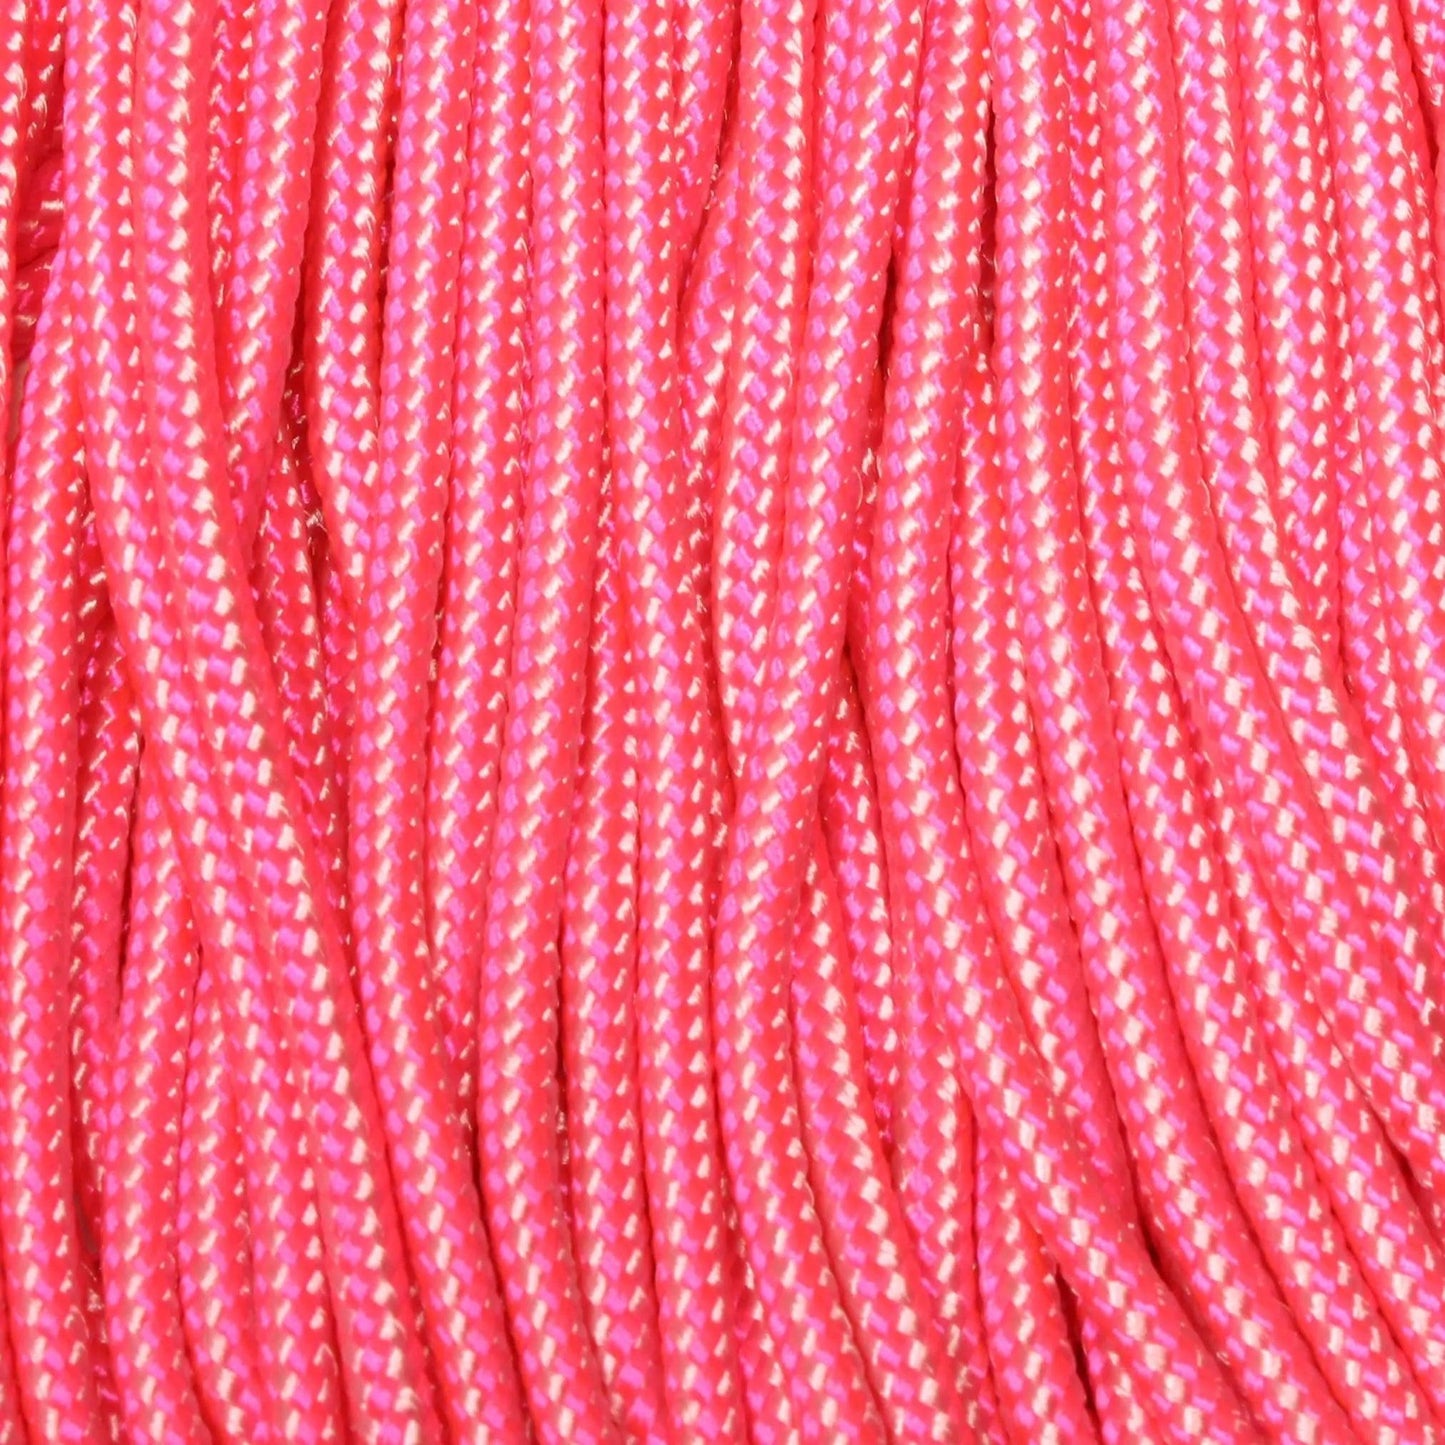 325-3 Paracord Candy Made in the USA Nylon/Nylon (100 FT.) - Paracord Galaxy